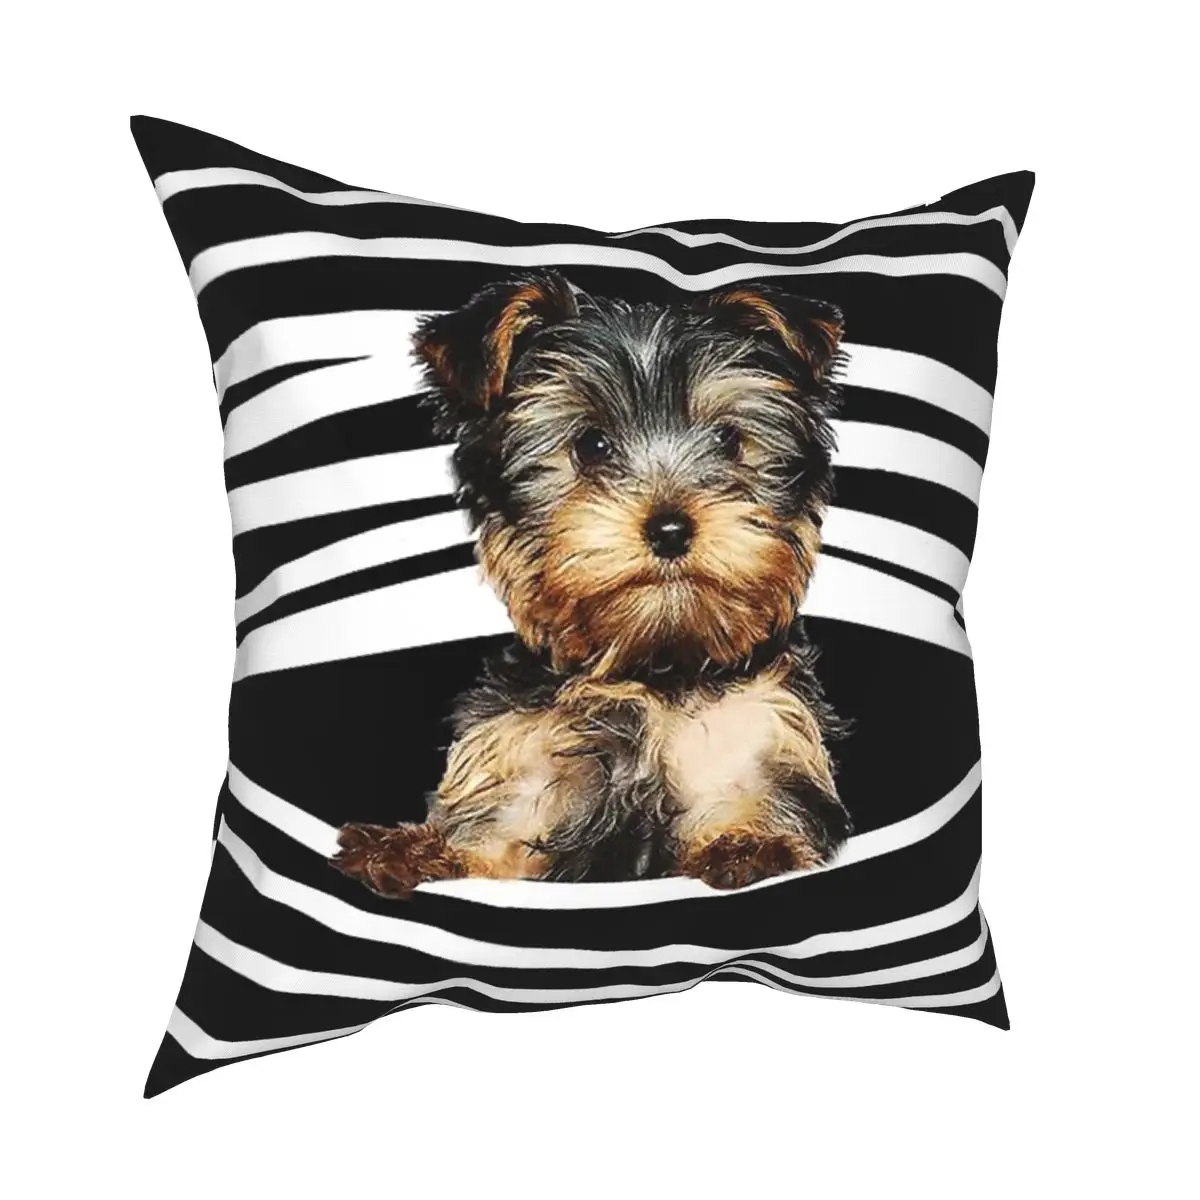 

Yorkshire Terrier Pillow Case Home Decor Yorkie Dog Puppy Cushions Throw Pillow for Car Polyester Double-sided Printing Novelty